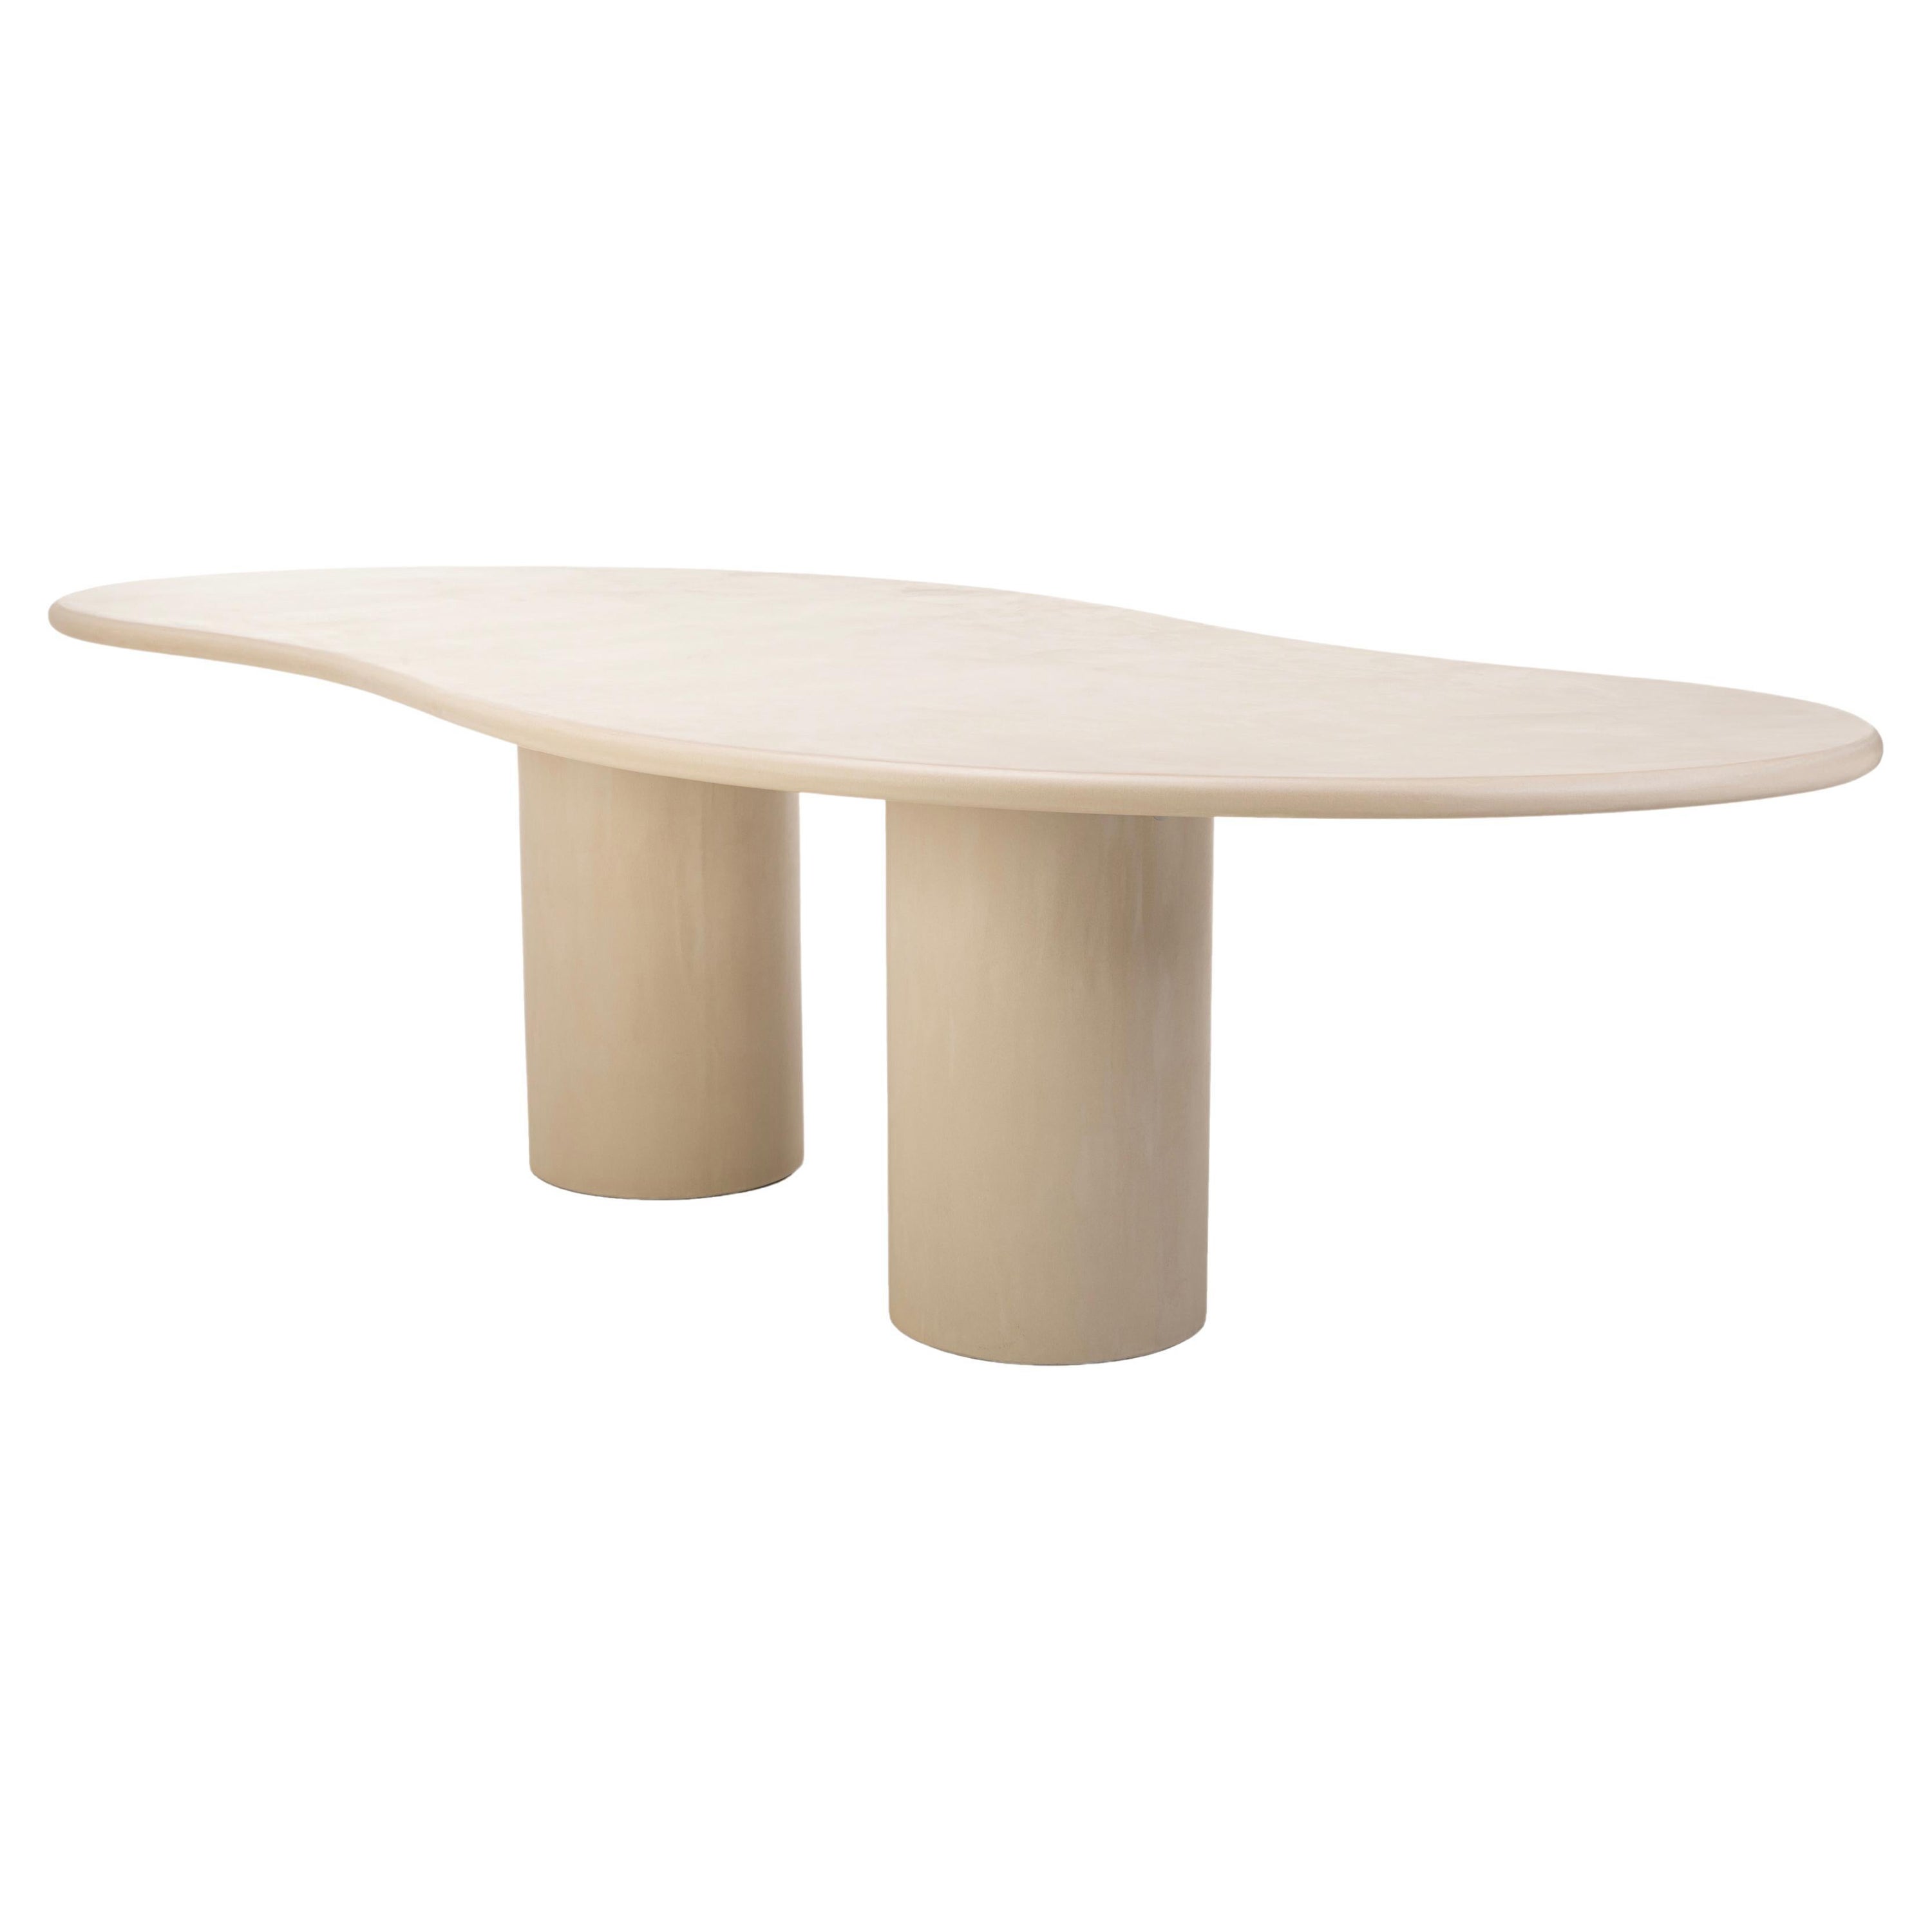 Contemporary Organic Natural Plaster "Latus" Table 280cm by Isabelle Beaumont